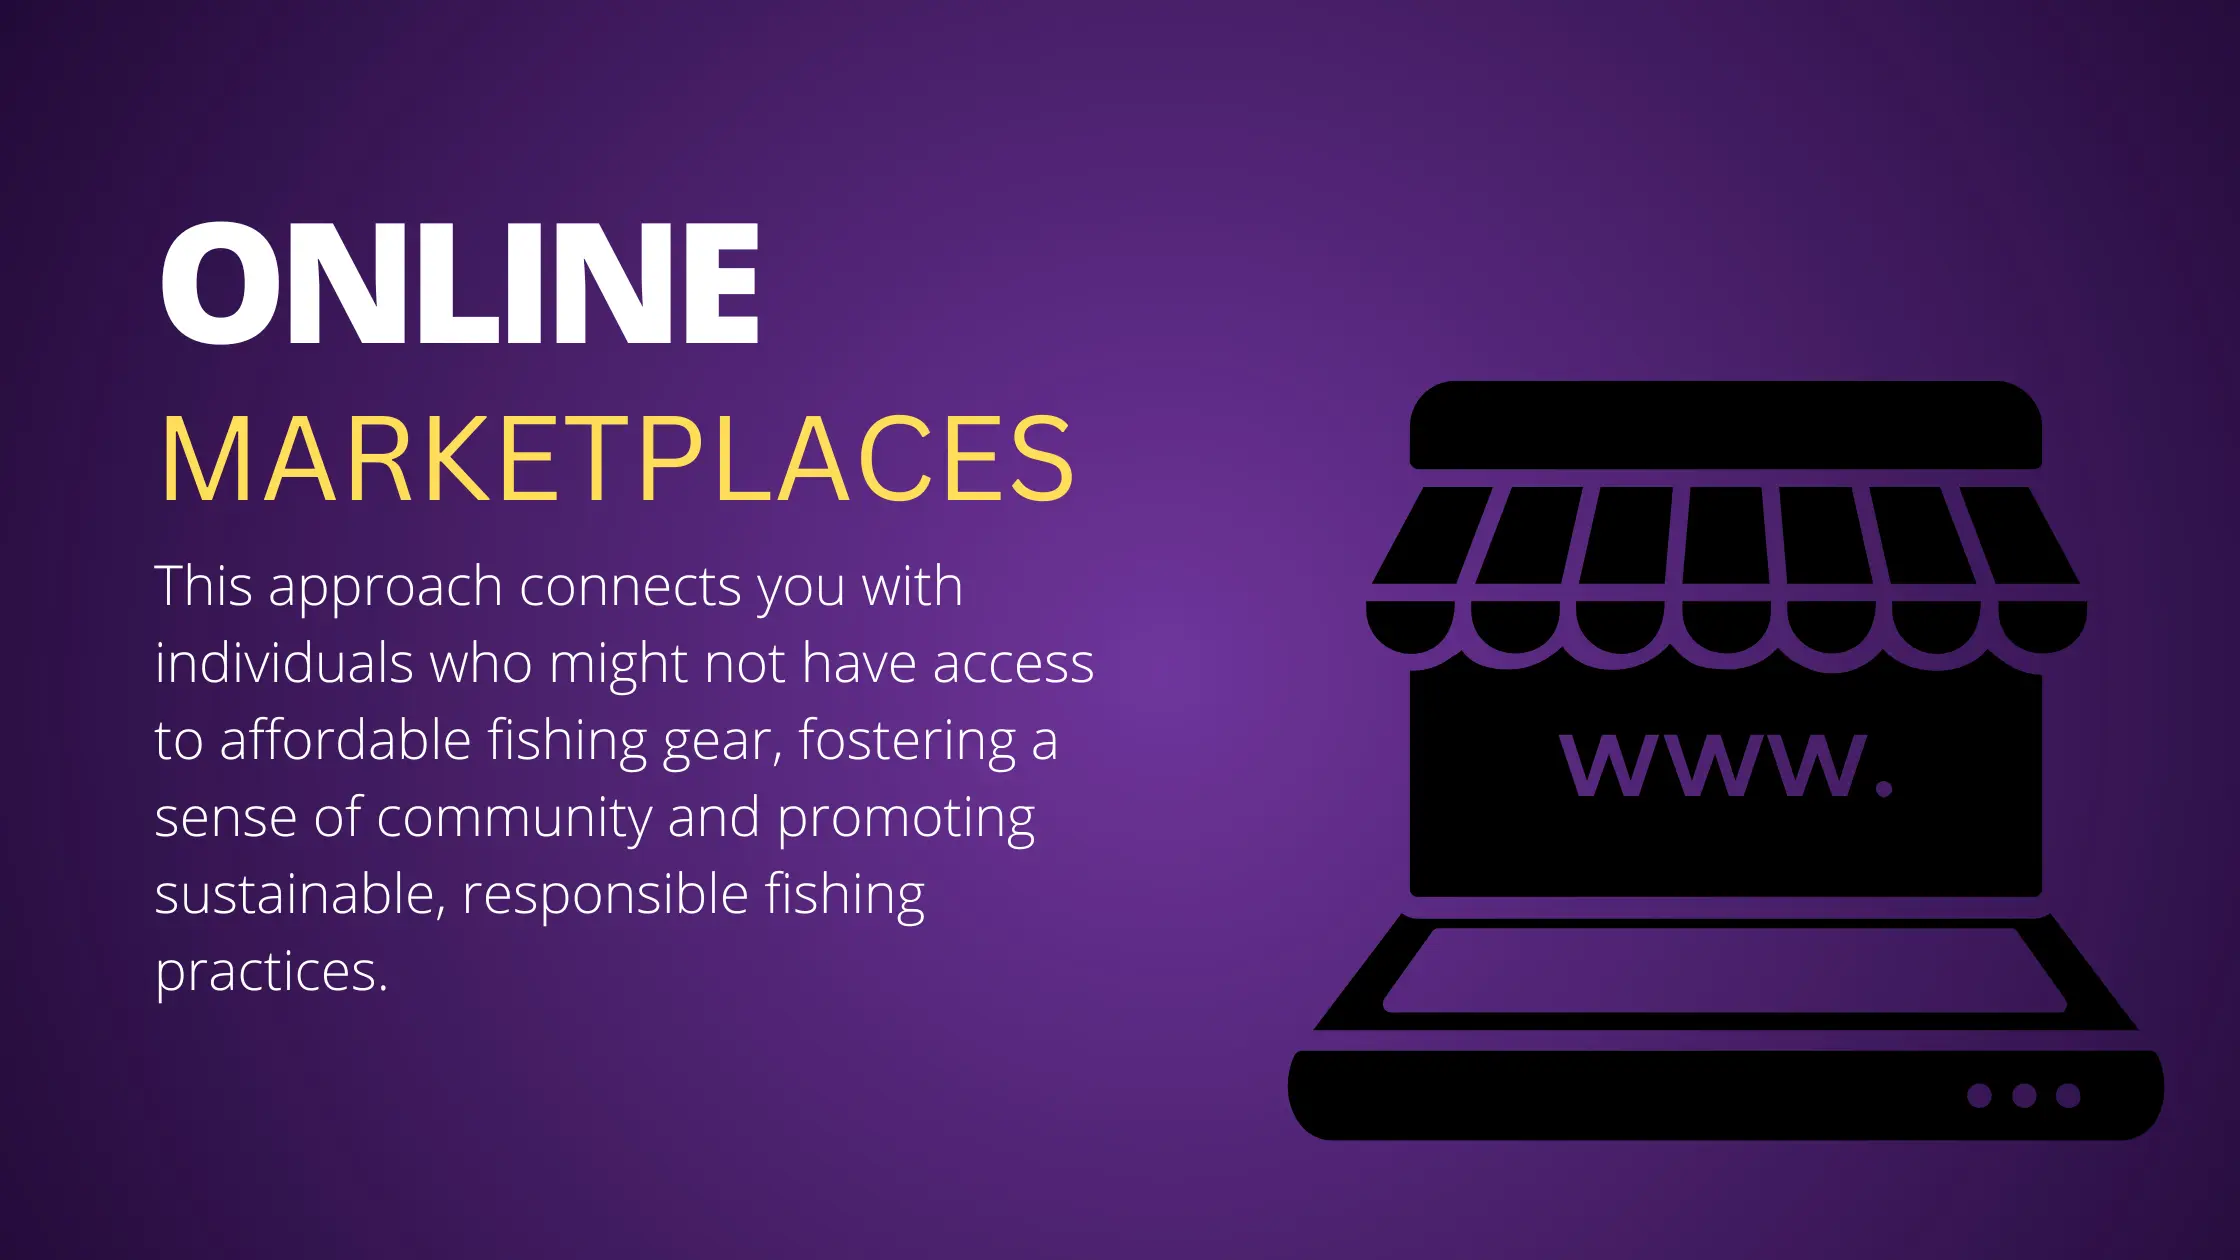 Where To Donate Fishing Equipment?5) Online Marketplaces